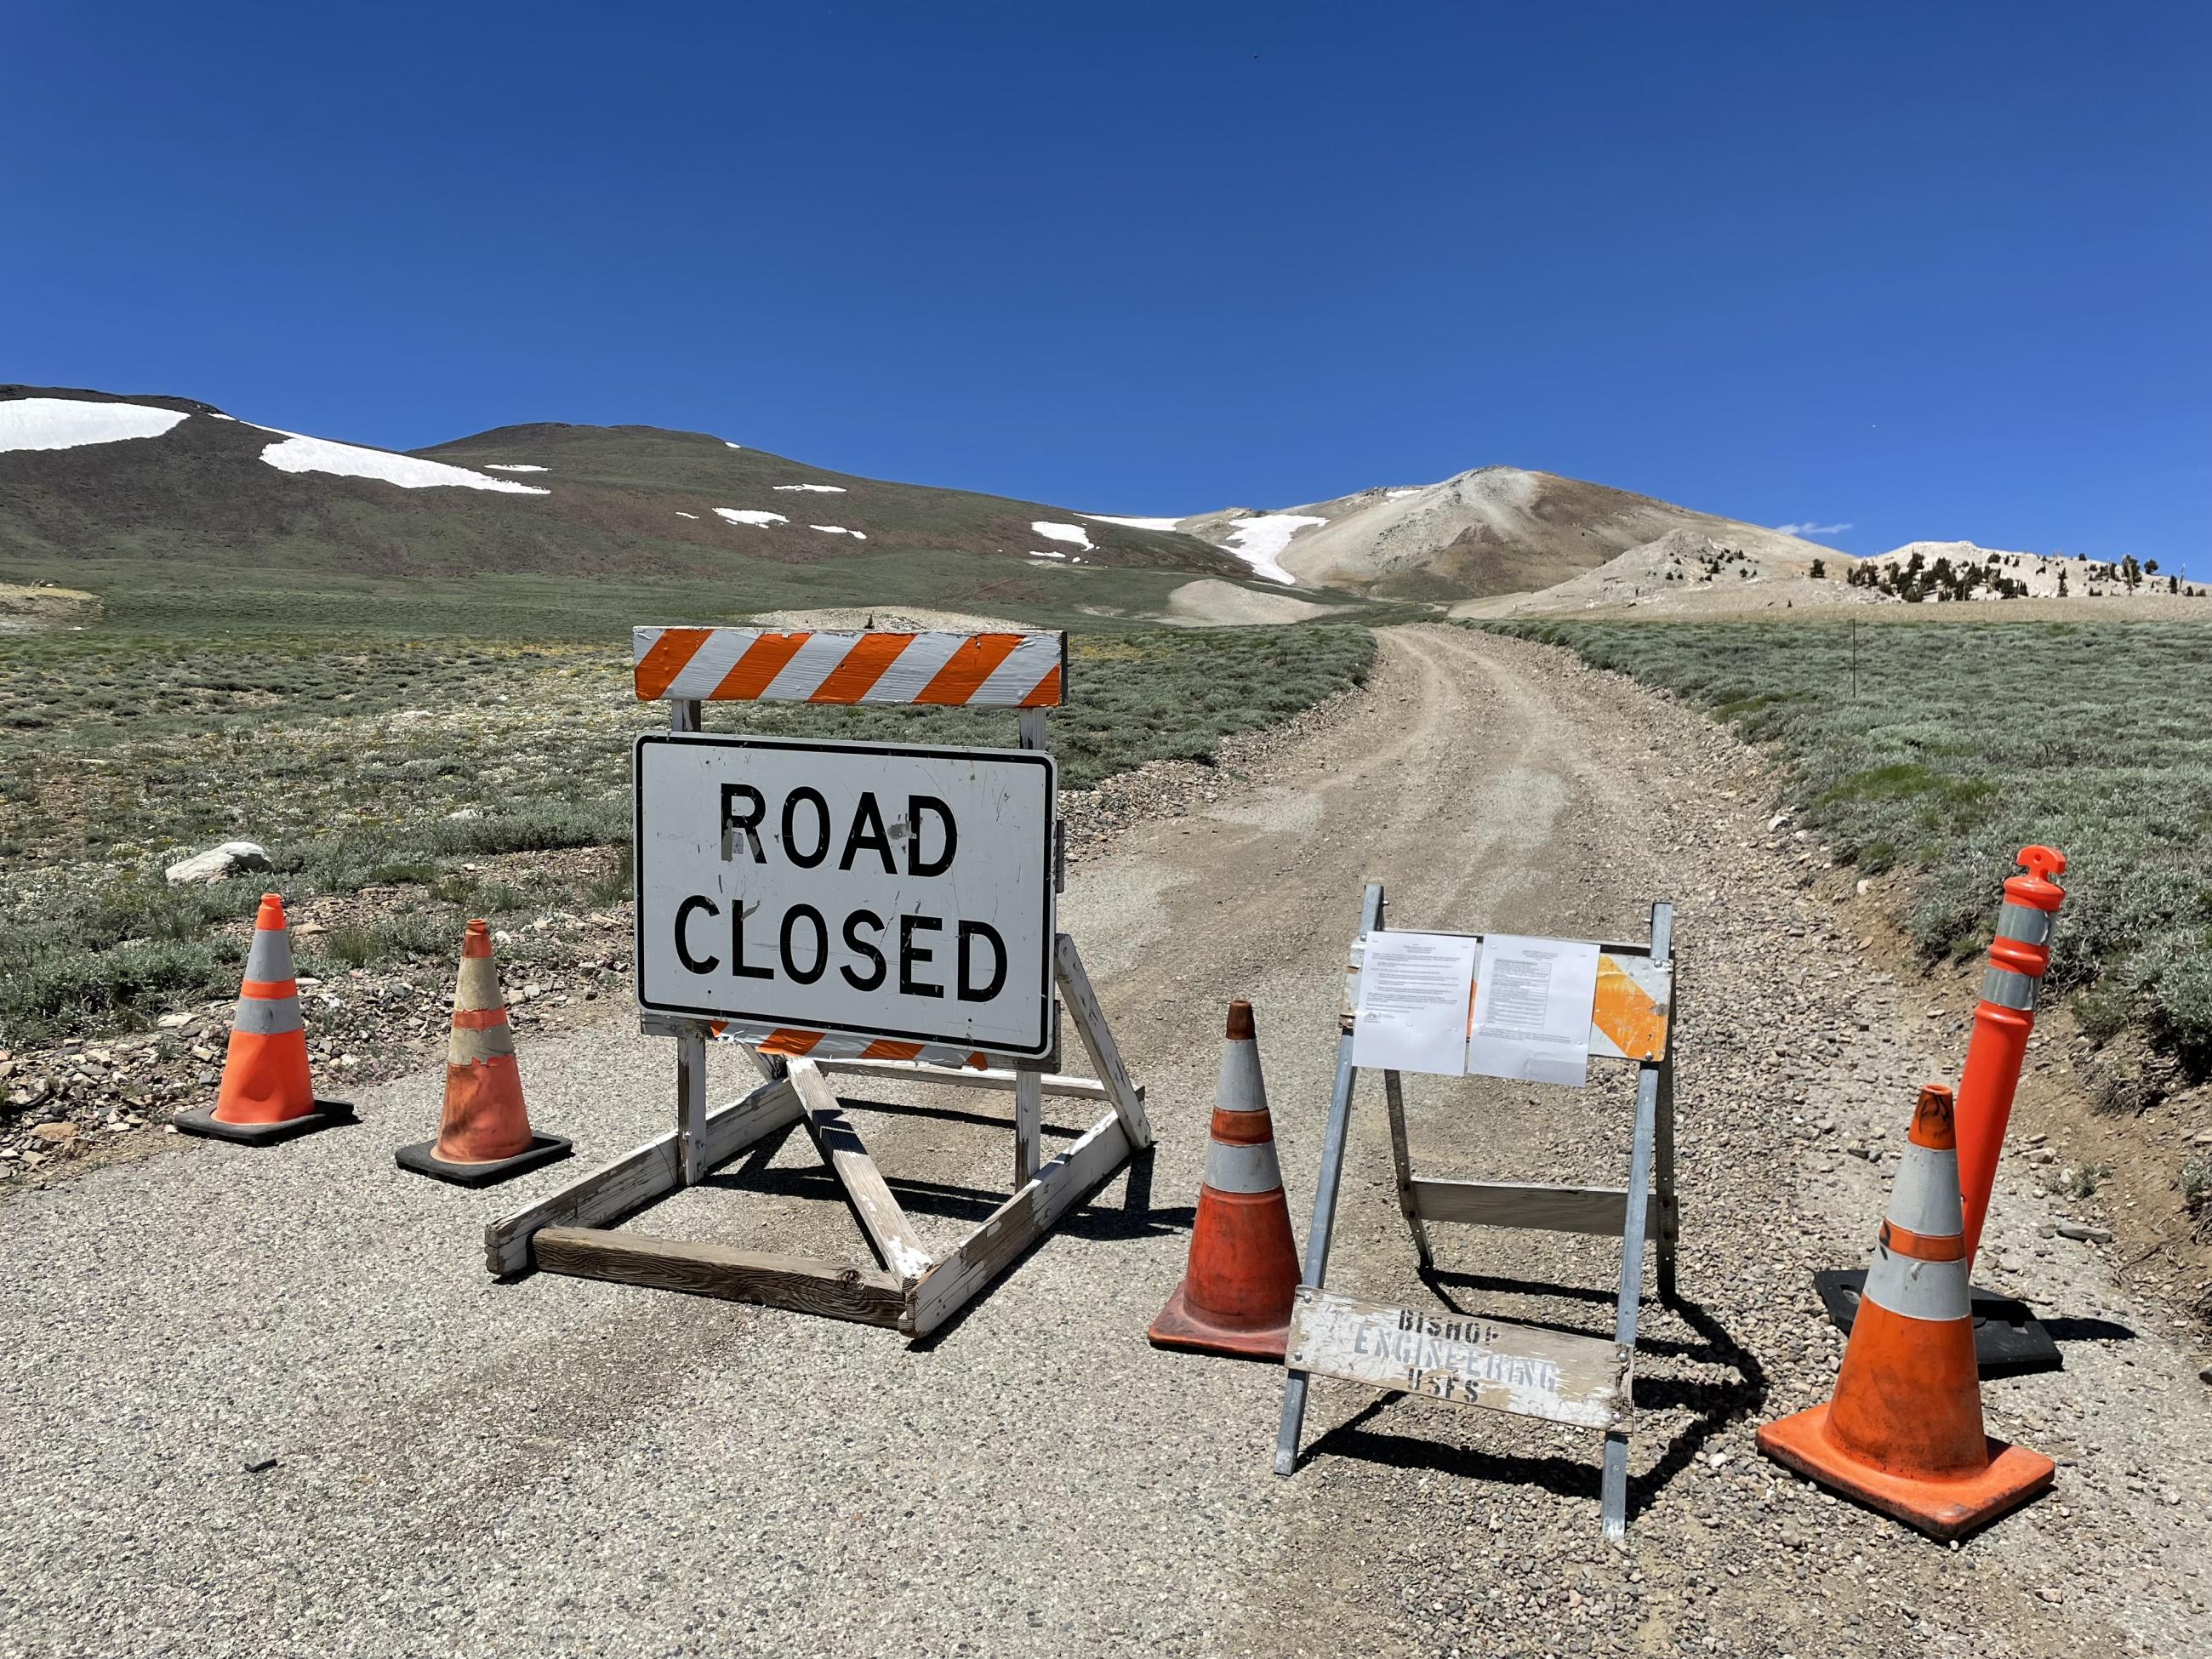 Image showing closure signage and barricades at White Mountain Road at Patriarch Junction